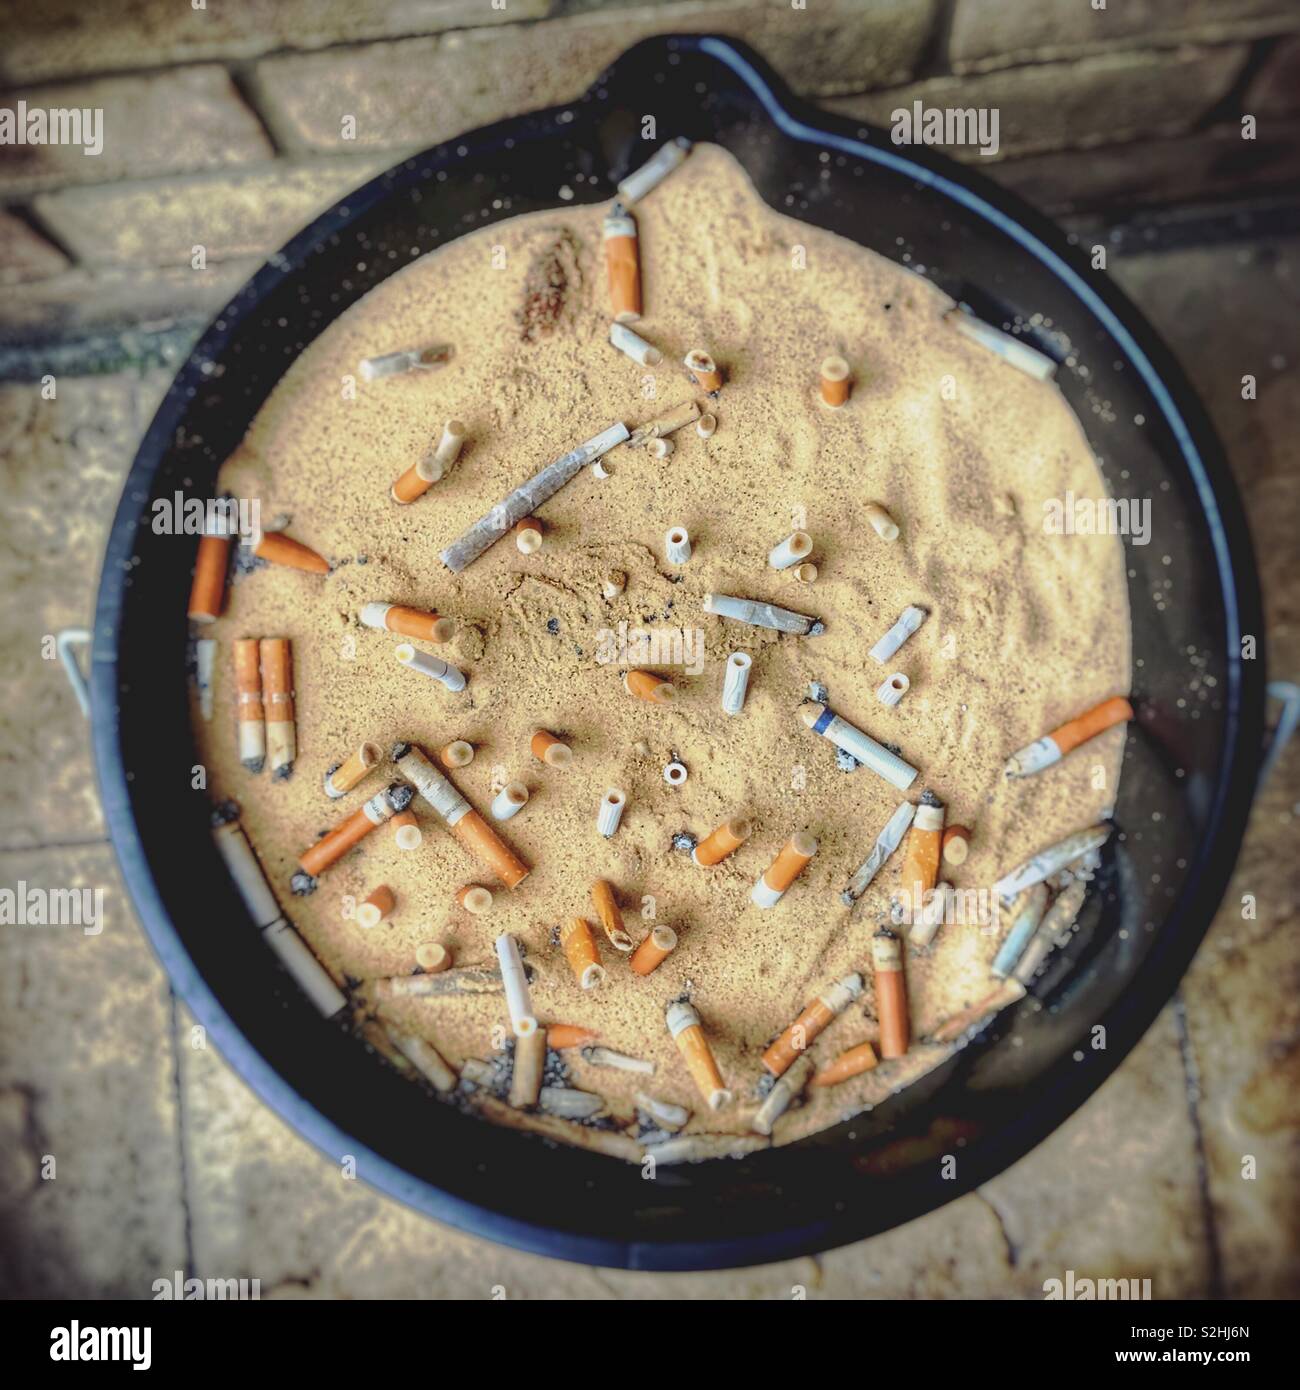 Sand bucket for cigarette butts Stock Photo